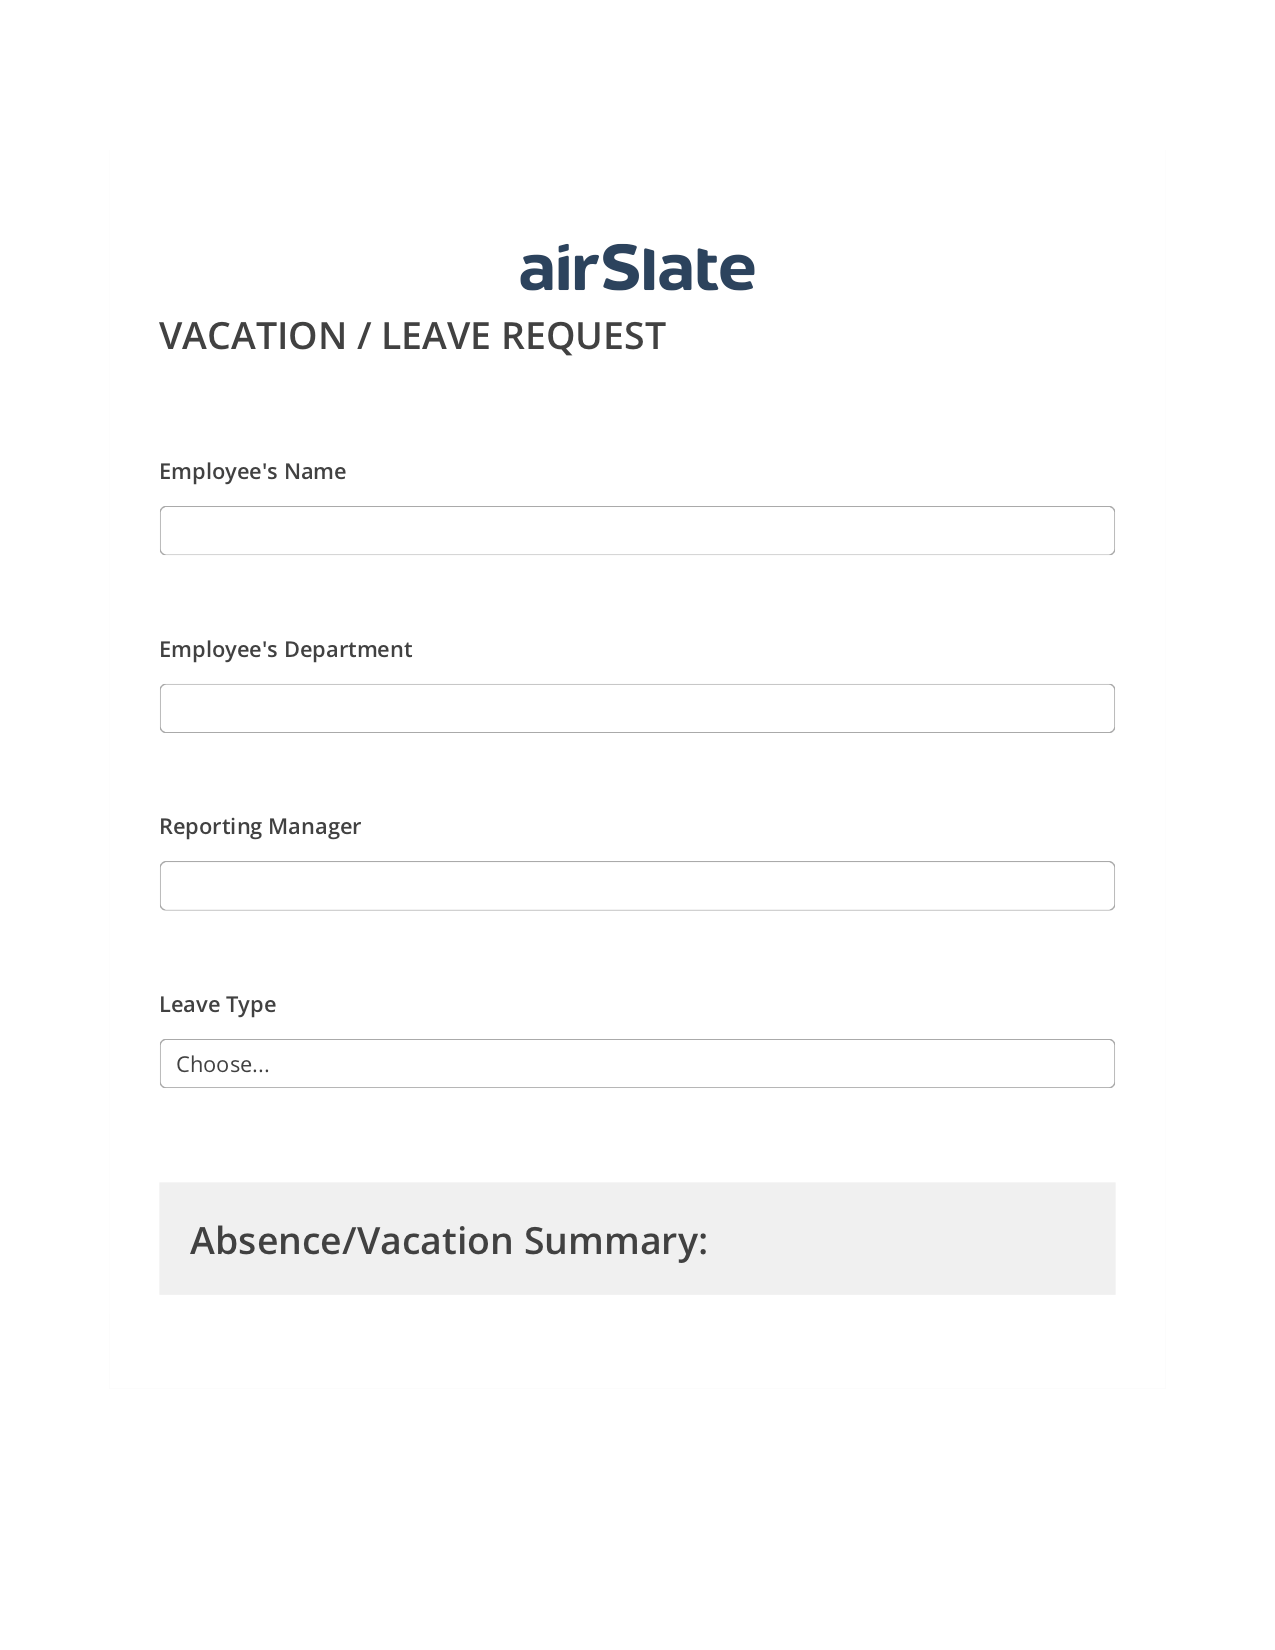 Vacation/Leave Request Workflow System Bot - Slack Two-Way Binding Bot, Lock the Slate Bot, Export to NetSuite Bot